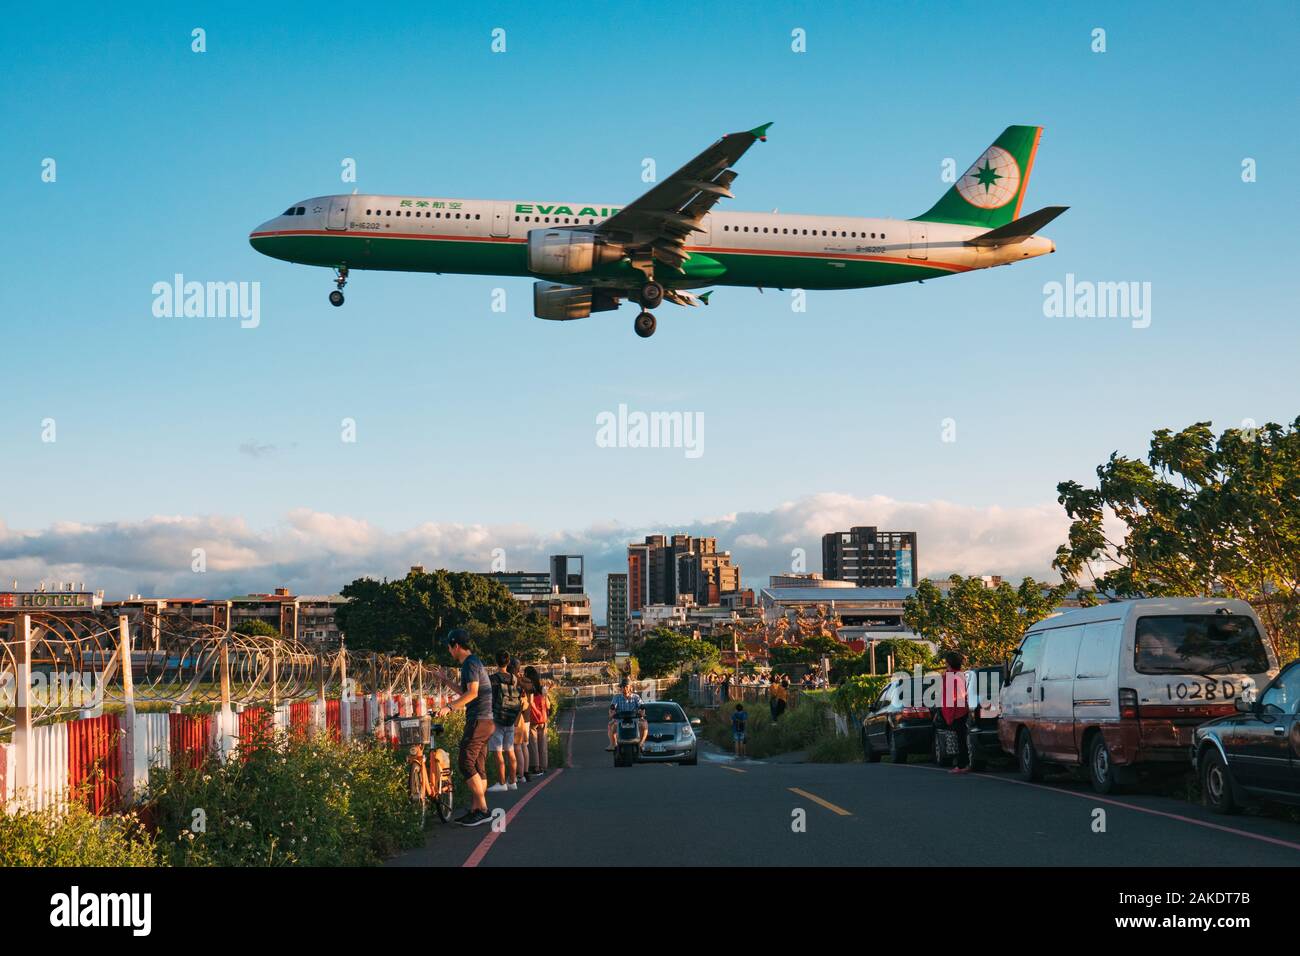 An EVA Airways Airbus A321 floats over the road on approach to Songshan Airport, Taipei. Stock Photo